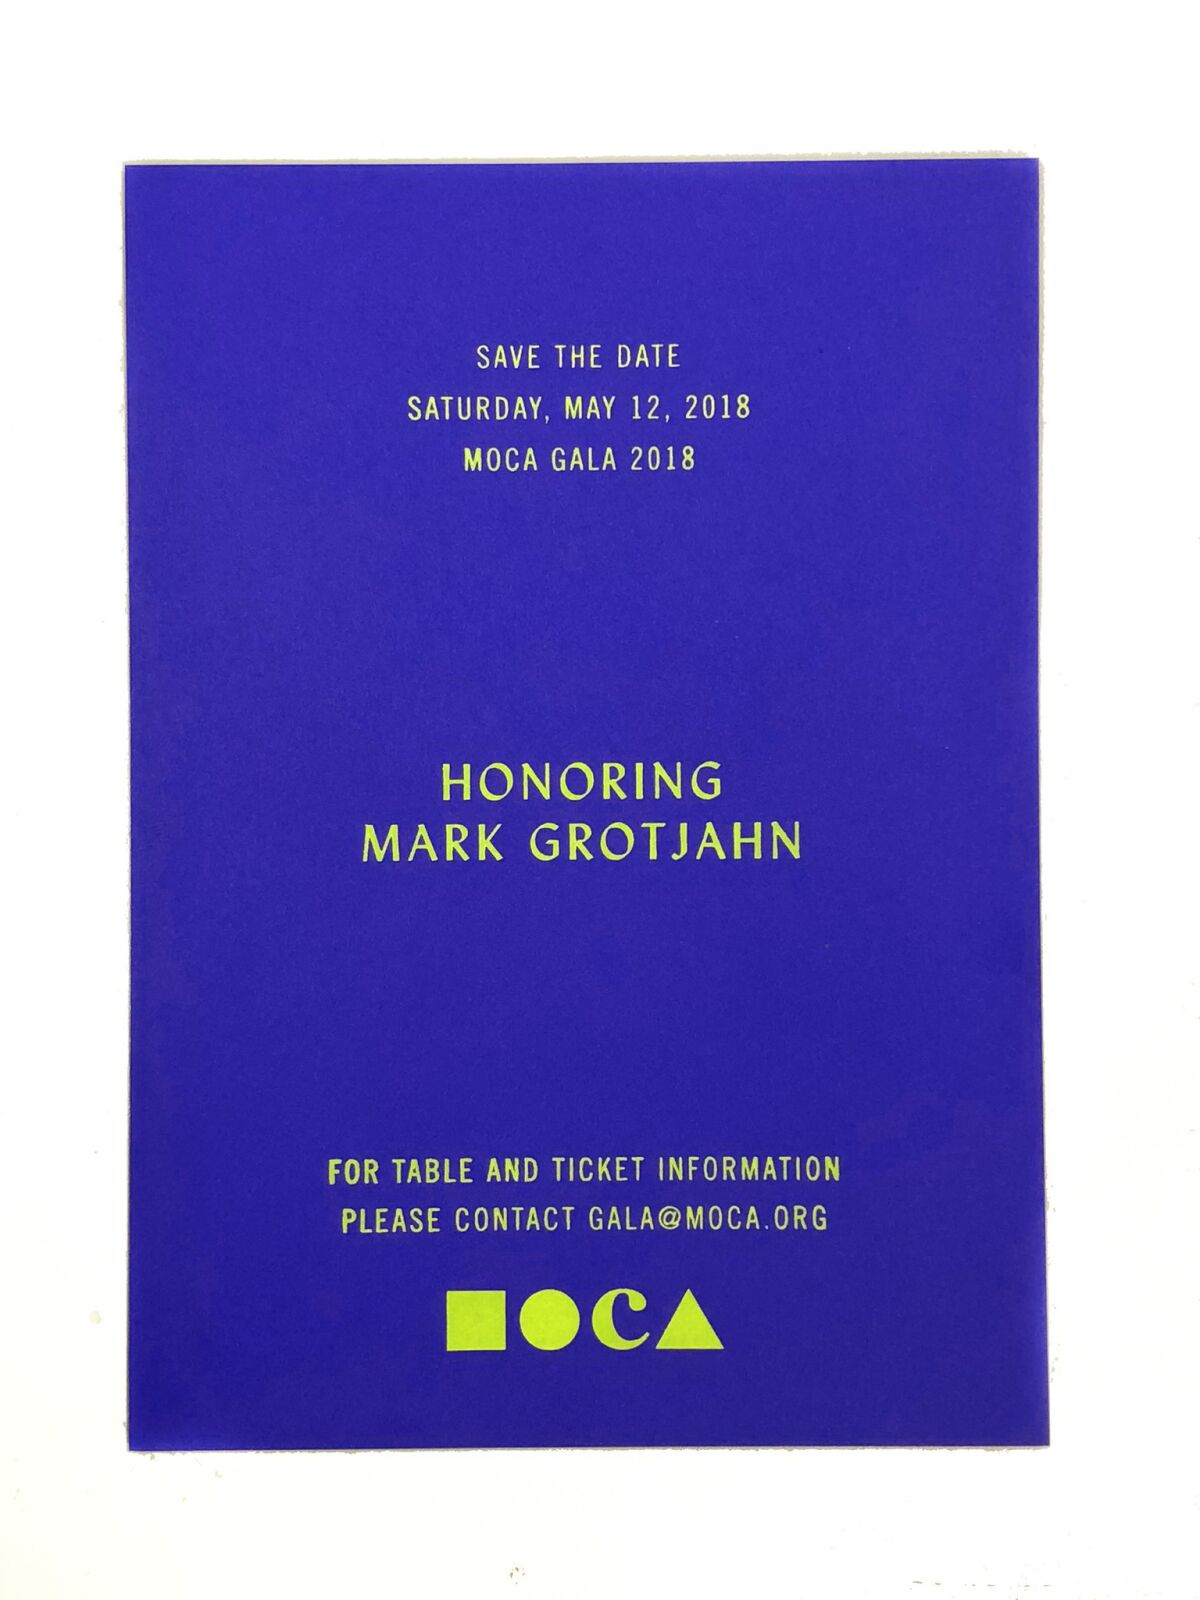 MOCA's "save the date" card.